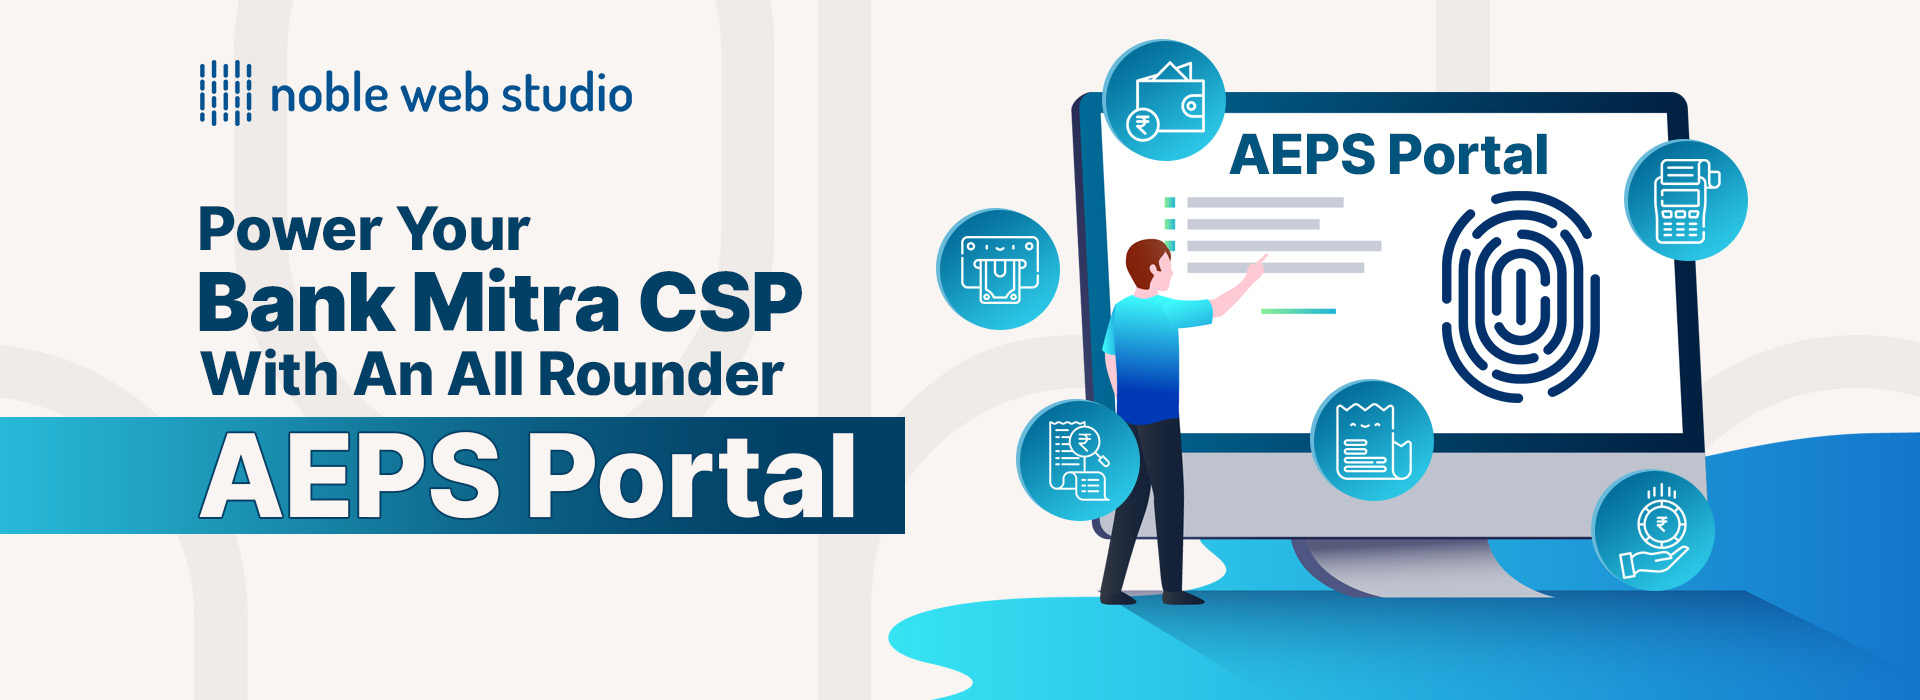 Power Your Bank Mitra CSP With An All Rounder AEPS Portal